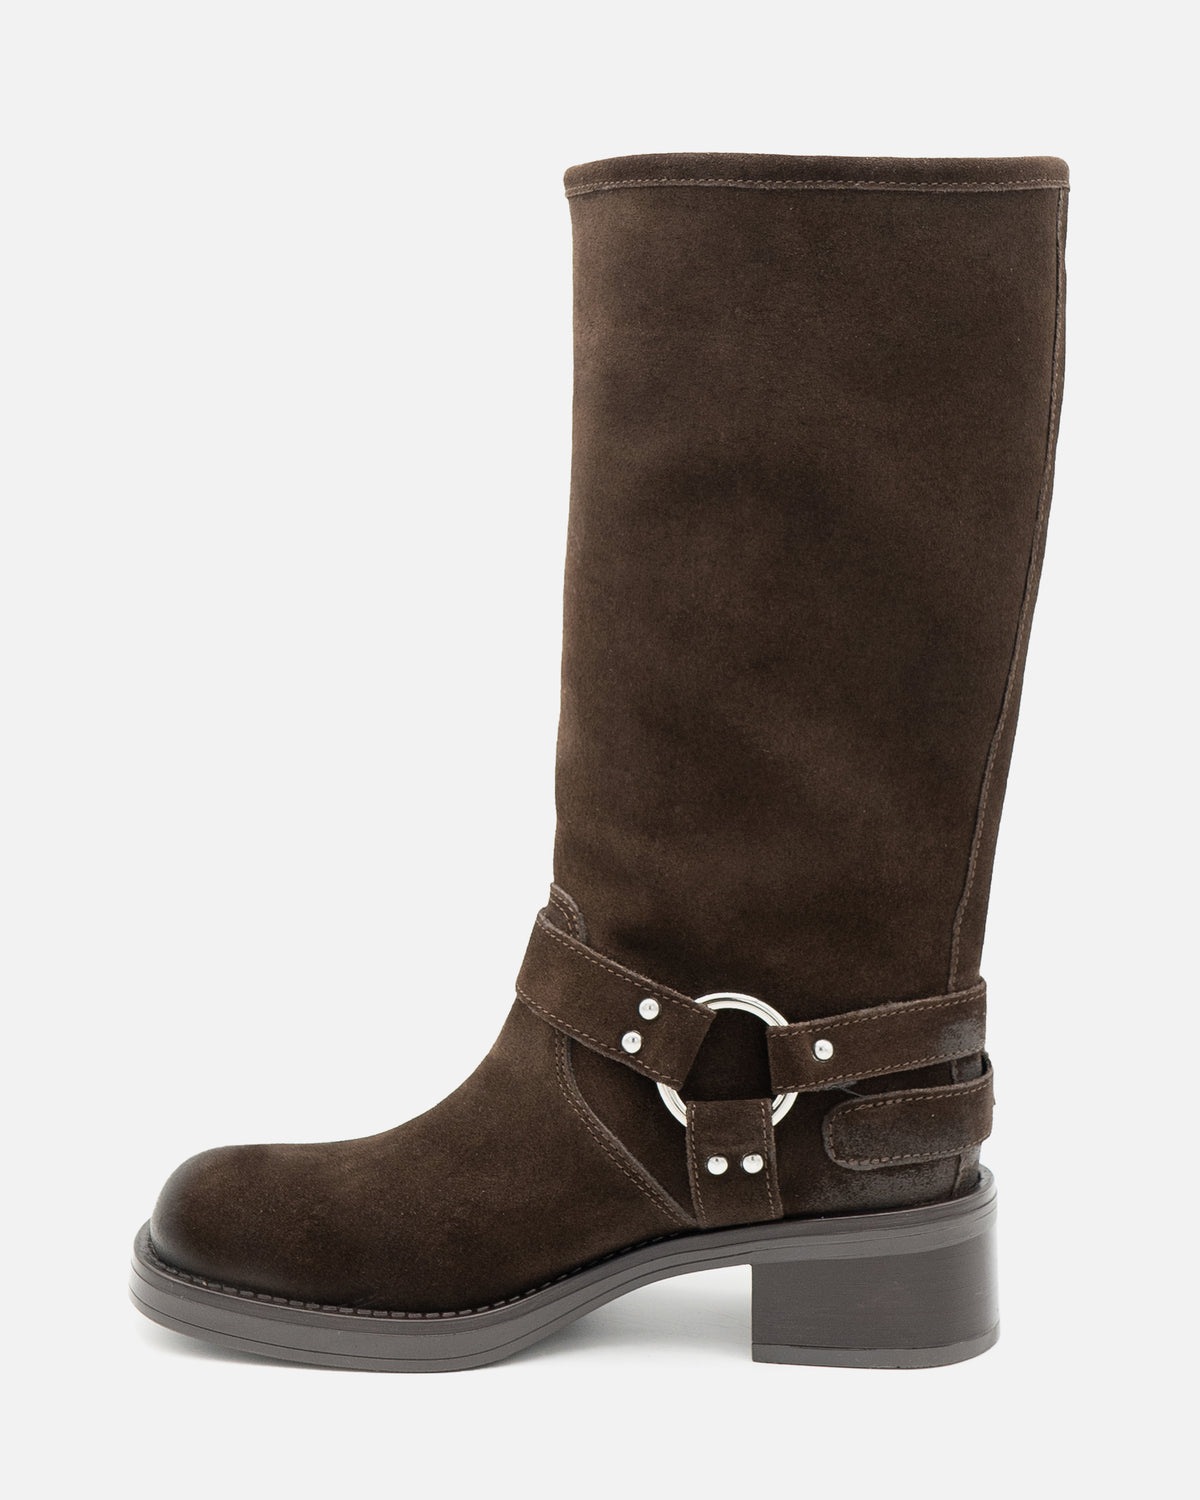 ZOE MULTI SUEDE LEATHER BOOTS